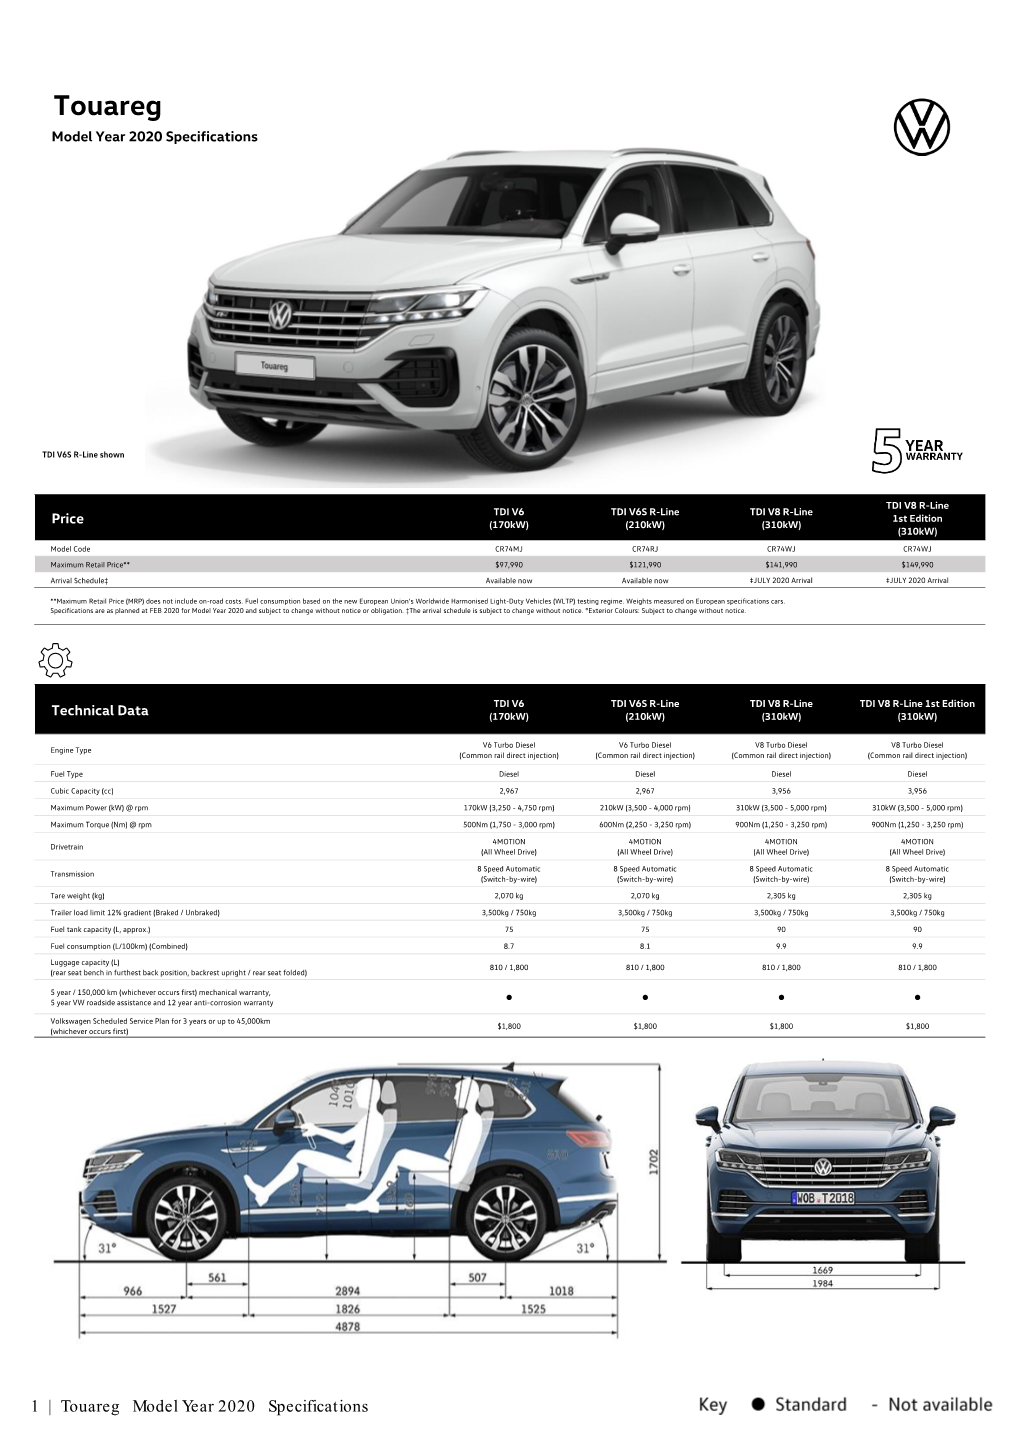 Touareg Model Year 2020 Specifications